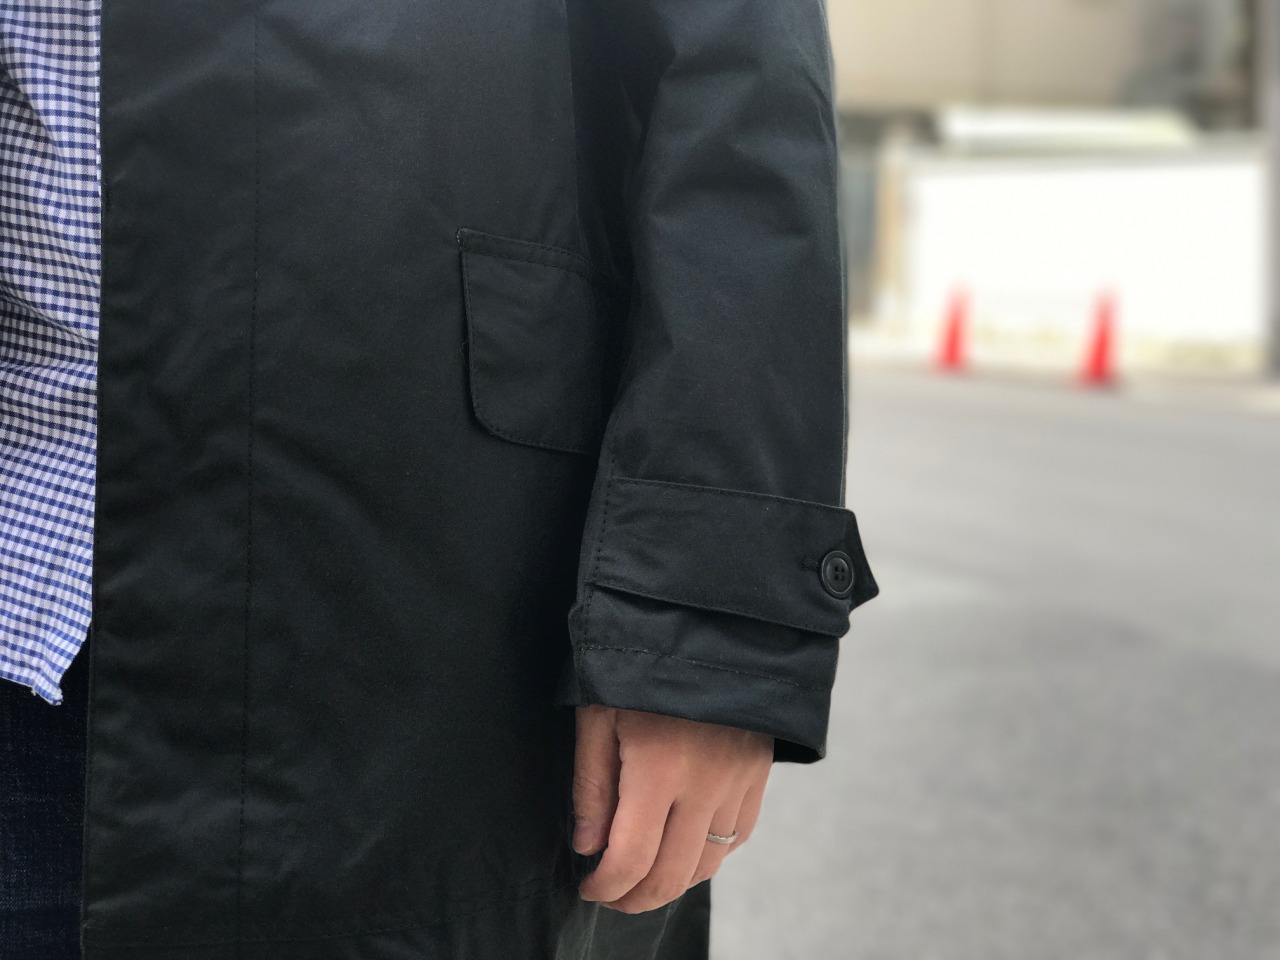 WAREHOUSE STAFF BLOG — BARBOUR SINGLE BREASTED COAT